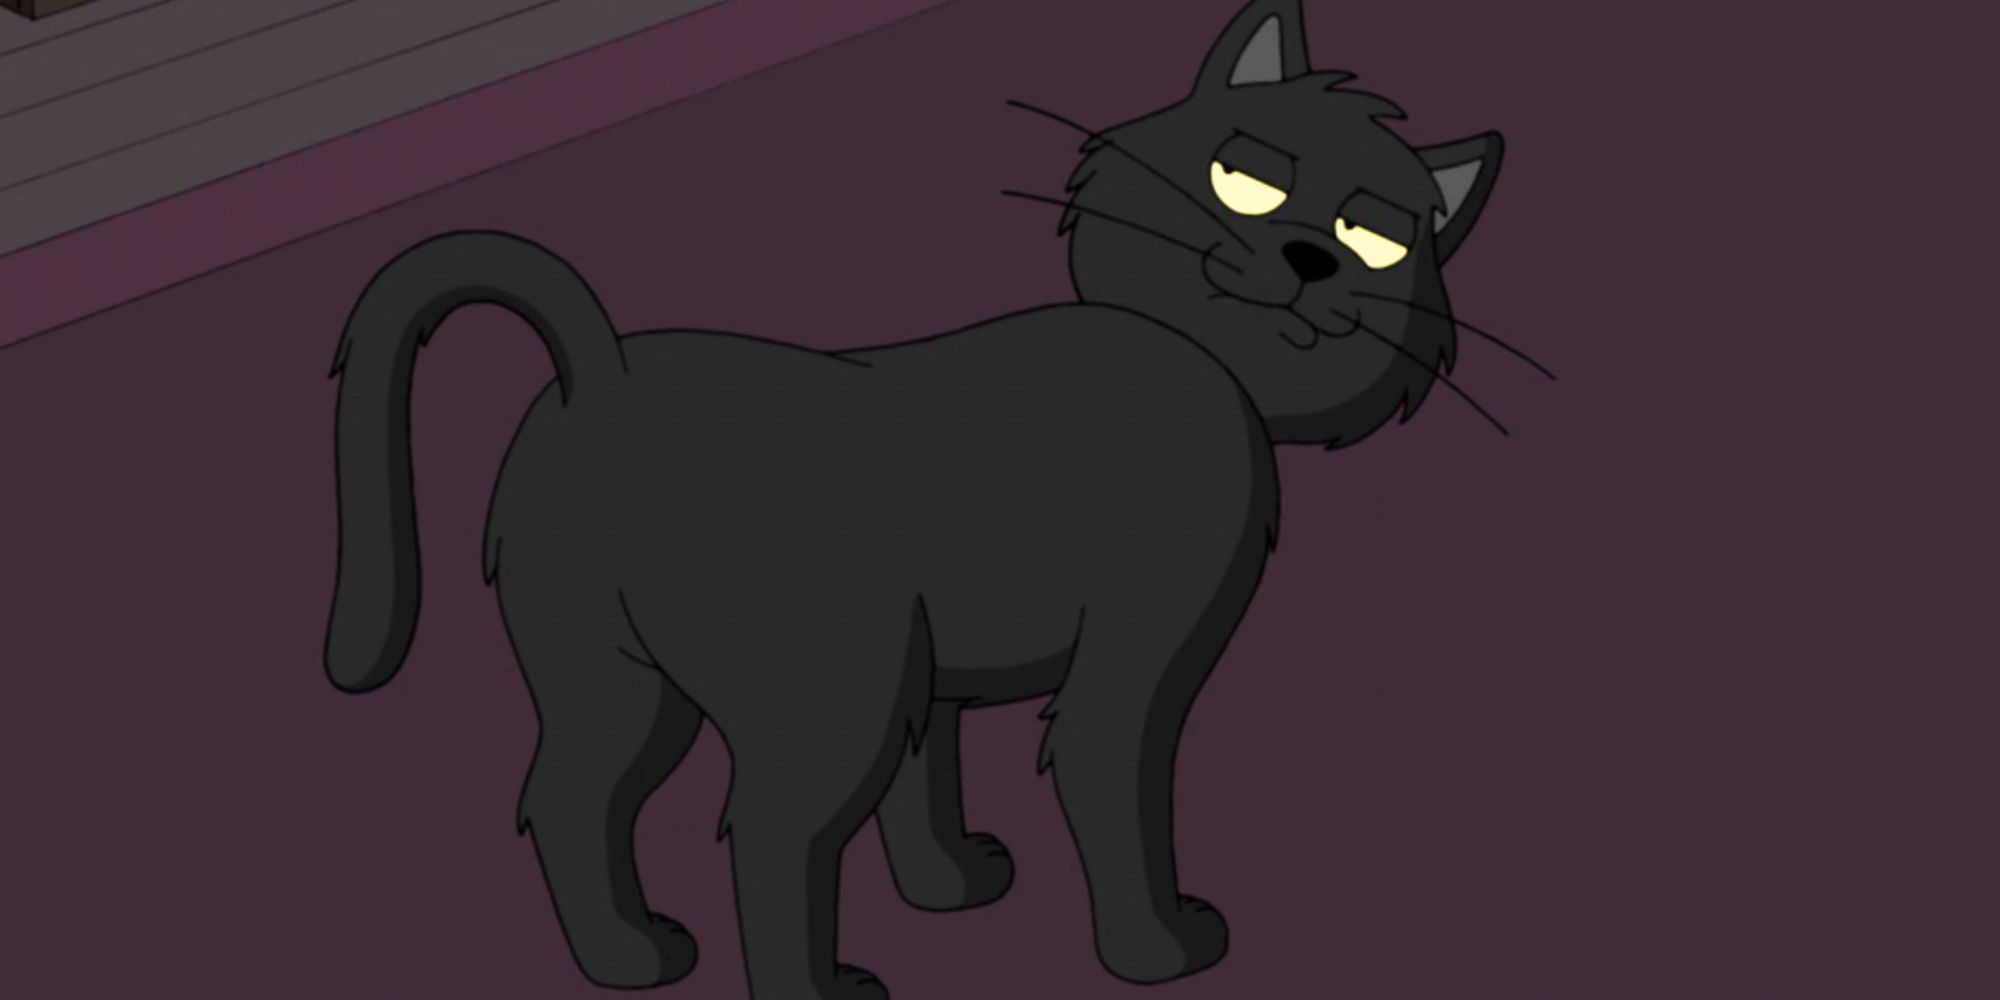 A black cat voiced by Patrick Stewart in Family Guy